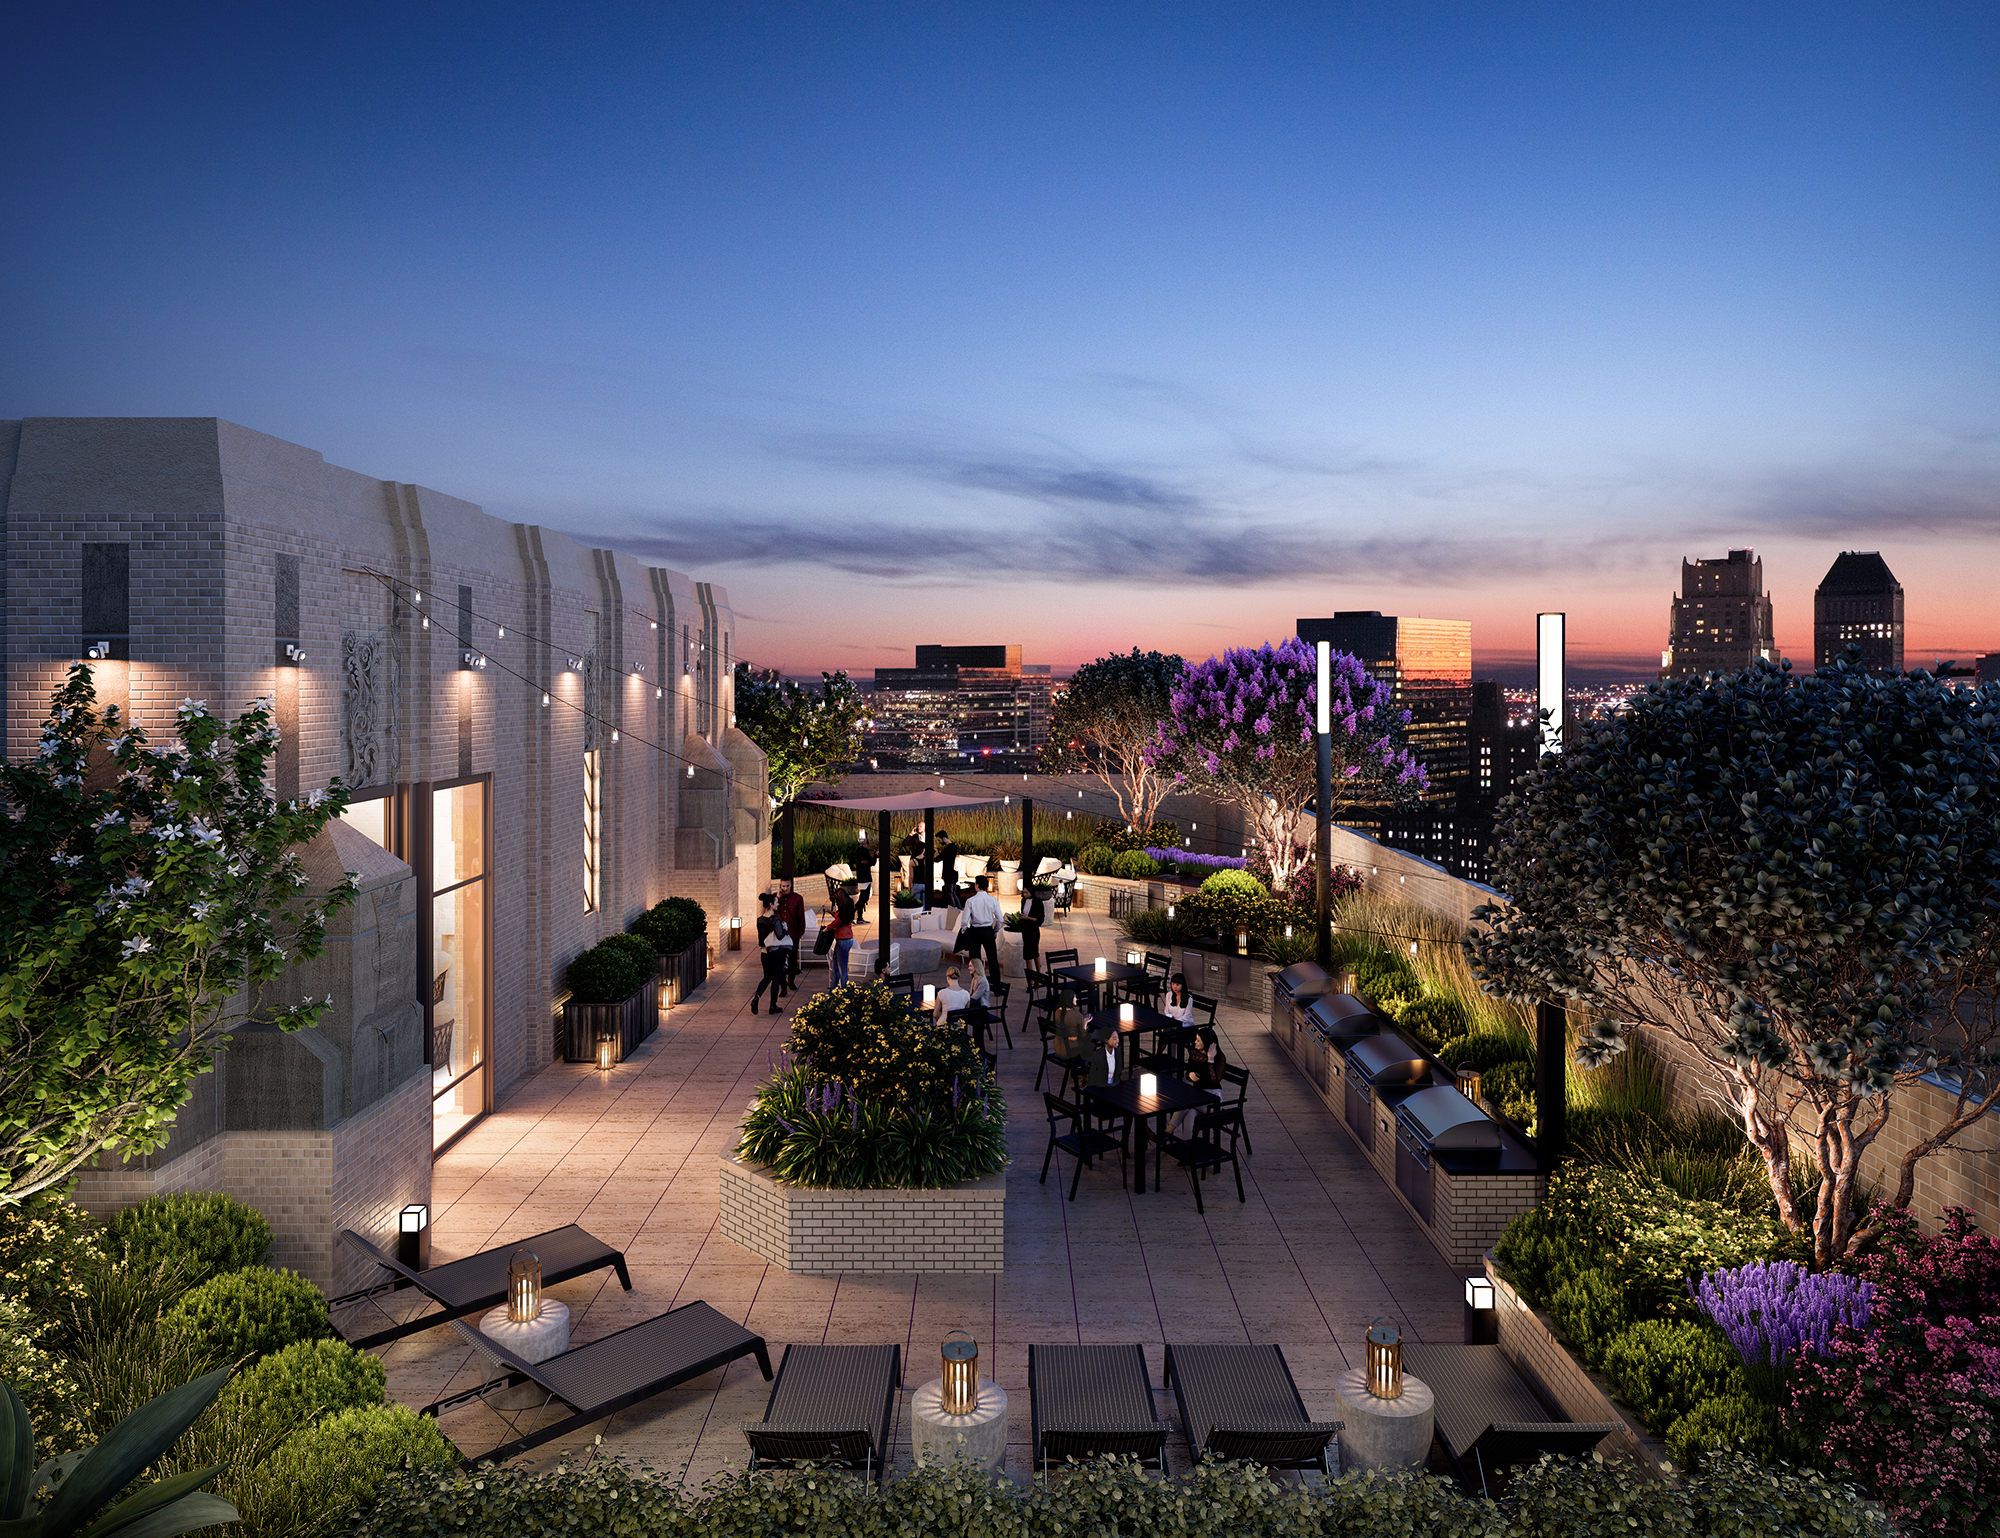 Sky deck at walker house rooftop amenity area rendering custom design advertising creative by New World Group, A creative agency